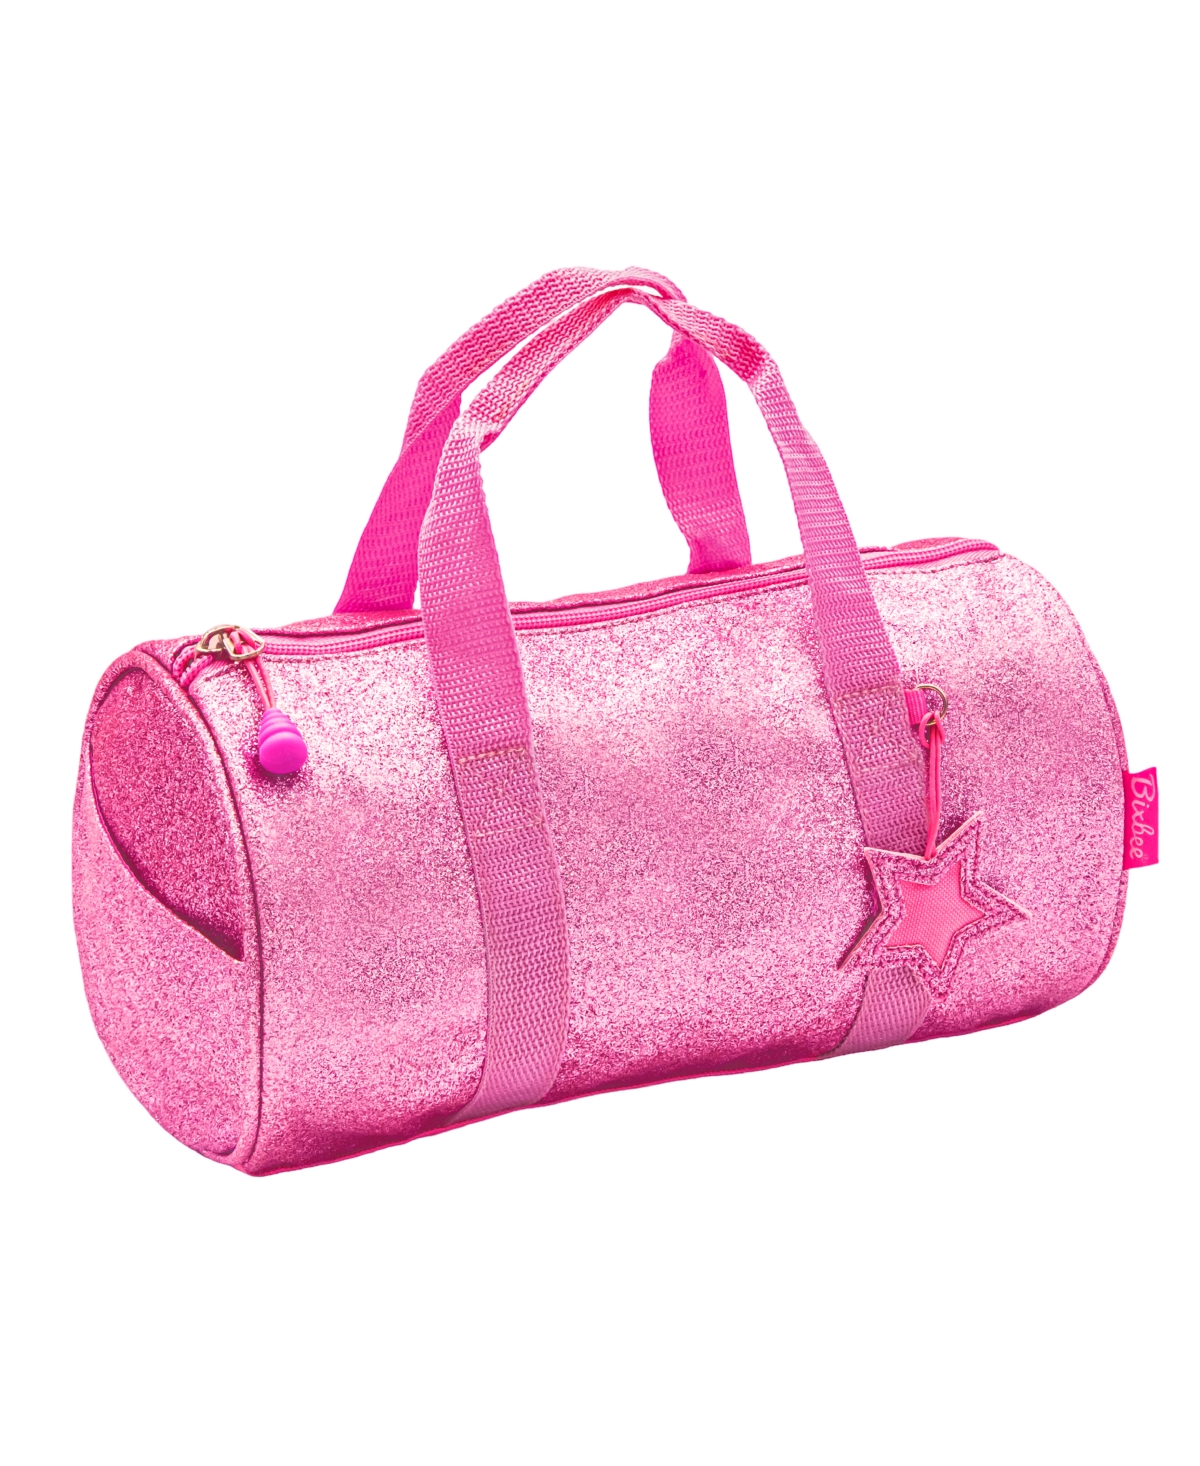 Sparkalicious Pink Duffle Bag - Pink